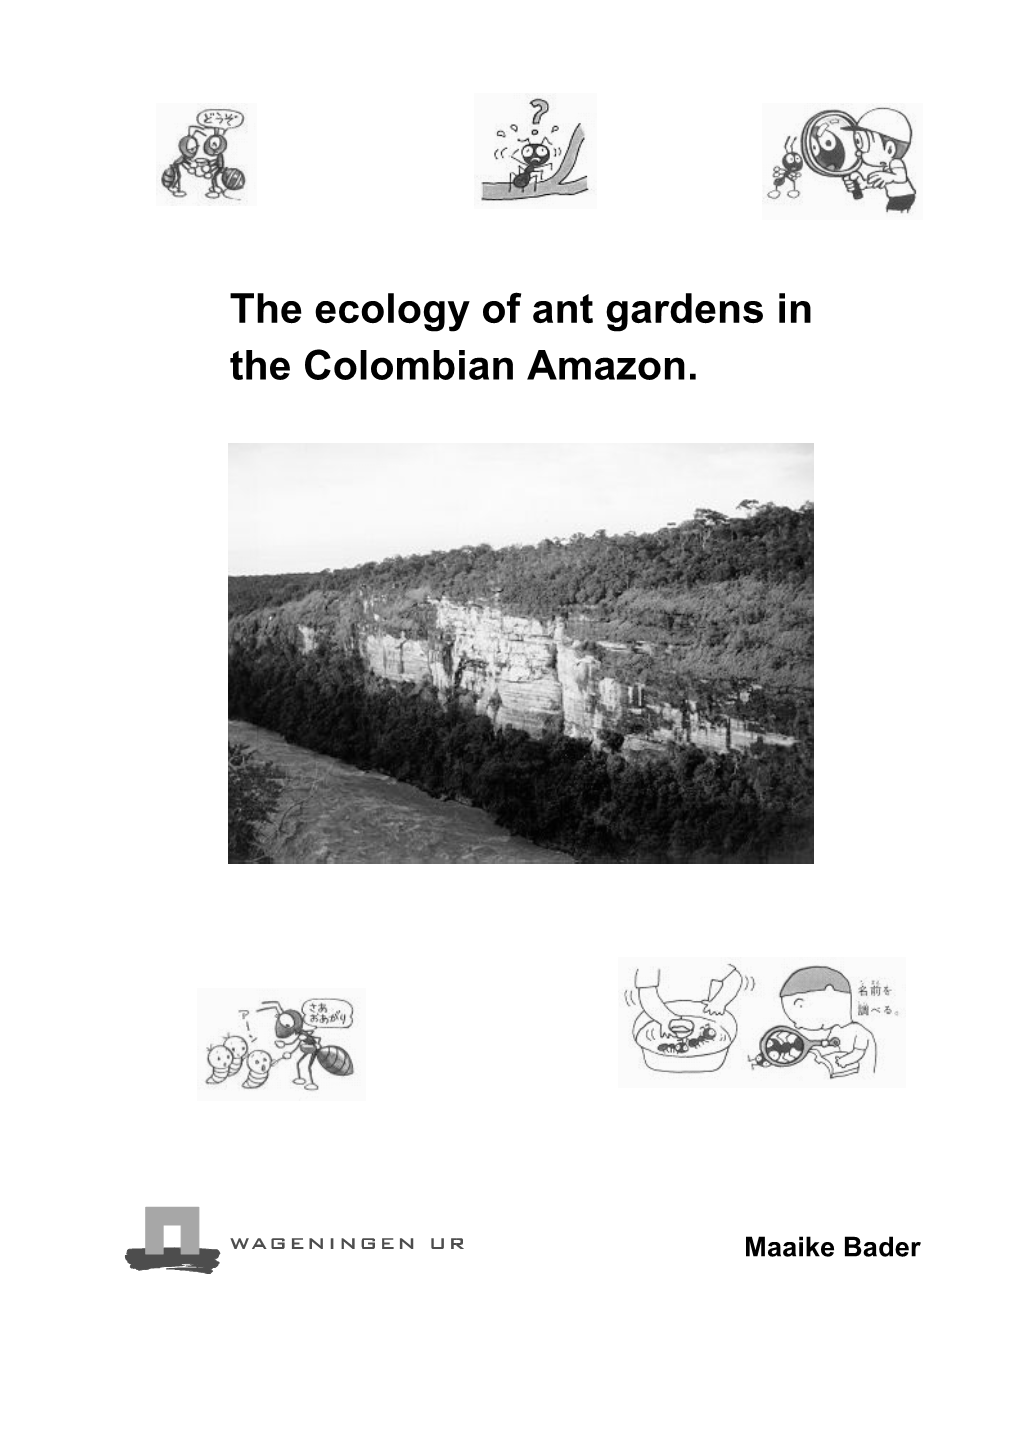 The Ecology of Ant Gardens in the Colombian Amazon